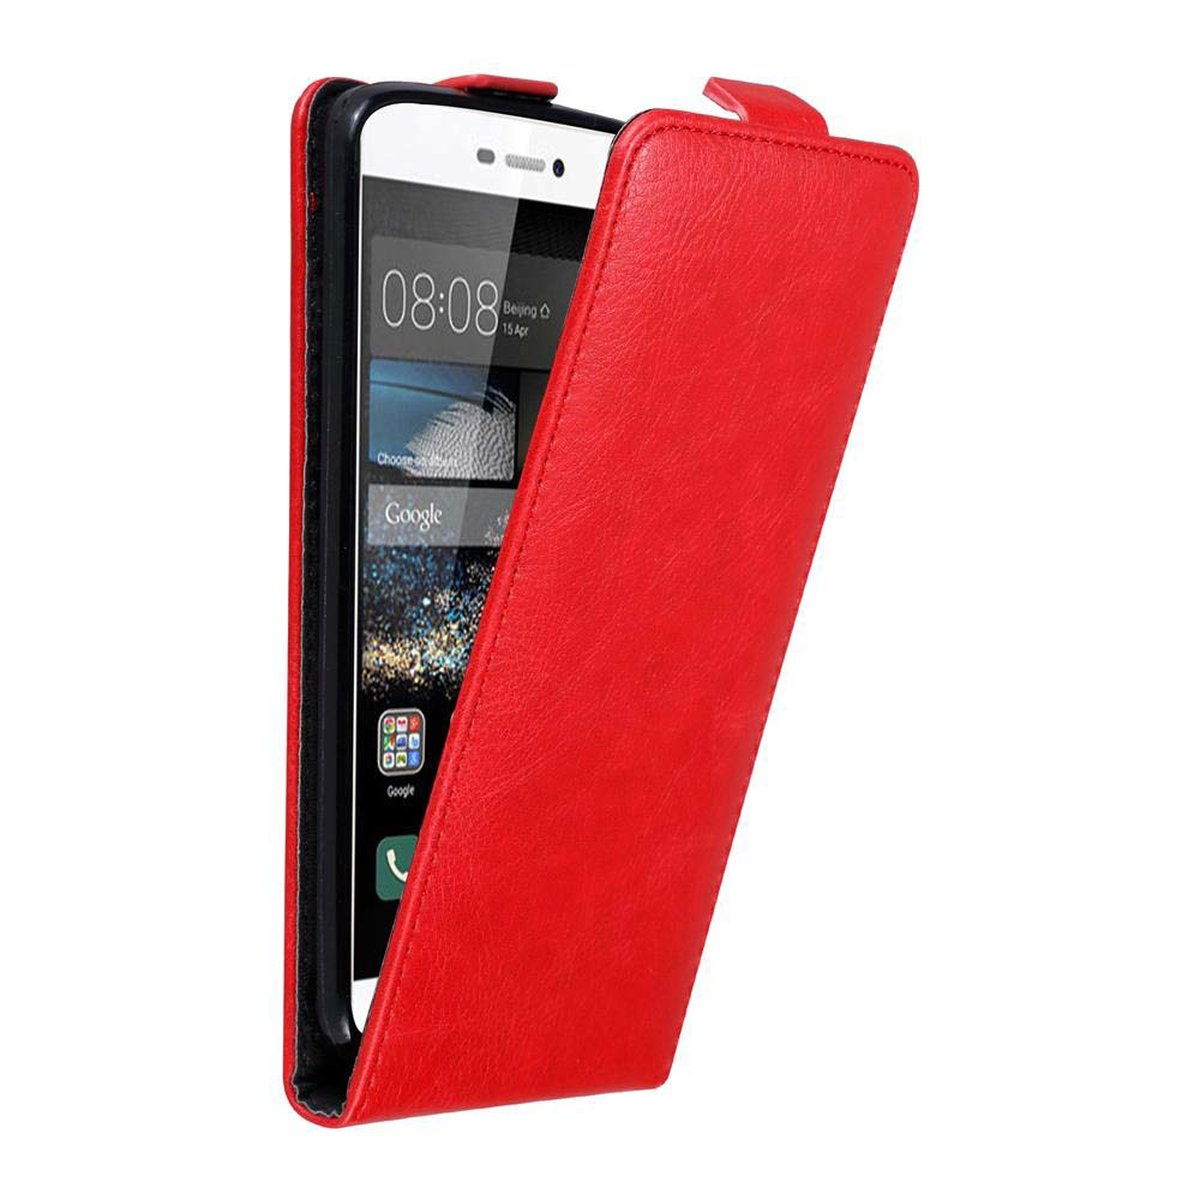 Flip CADORABO P8, Flip Huawei, ROT Cover, Style, Hülle APFEL im